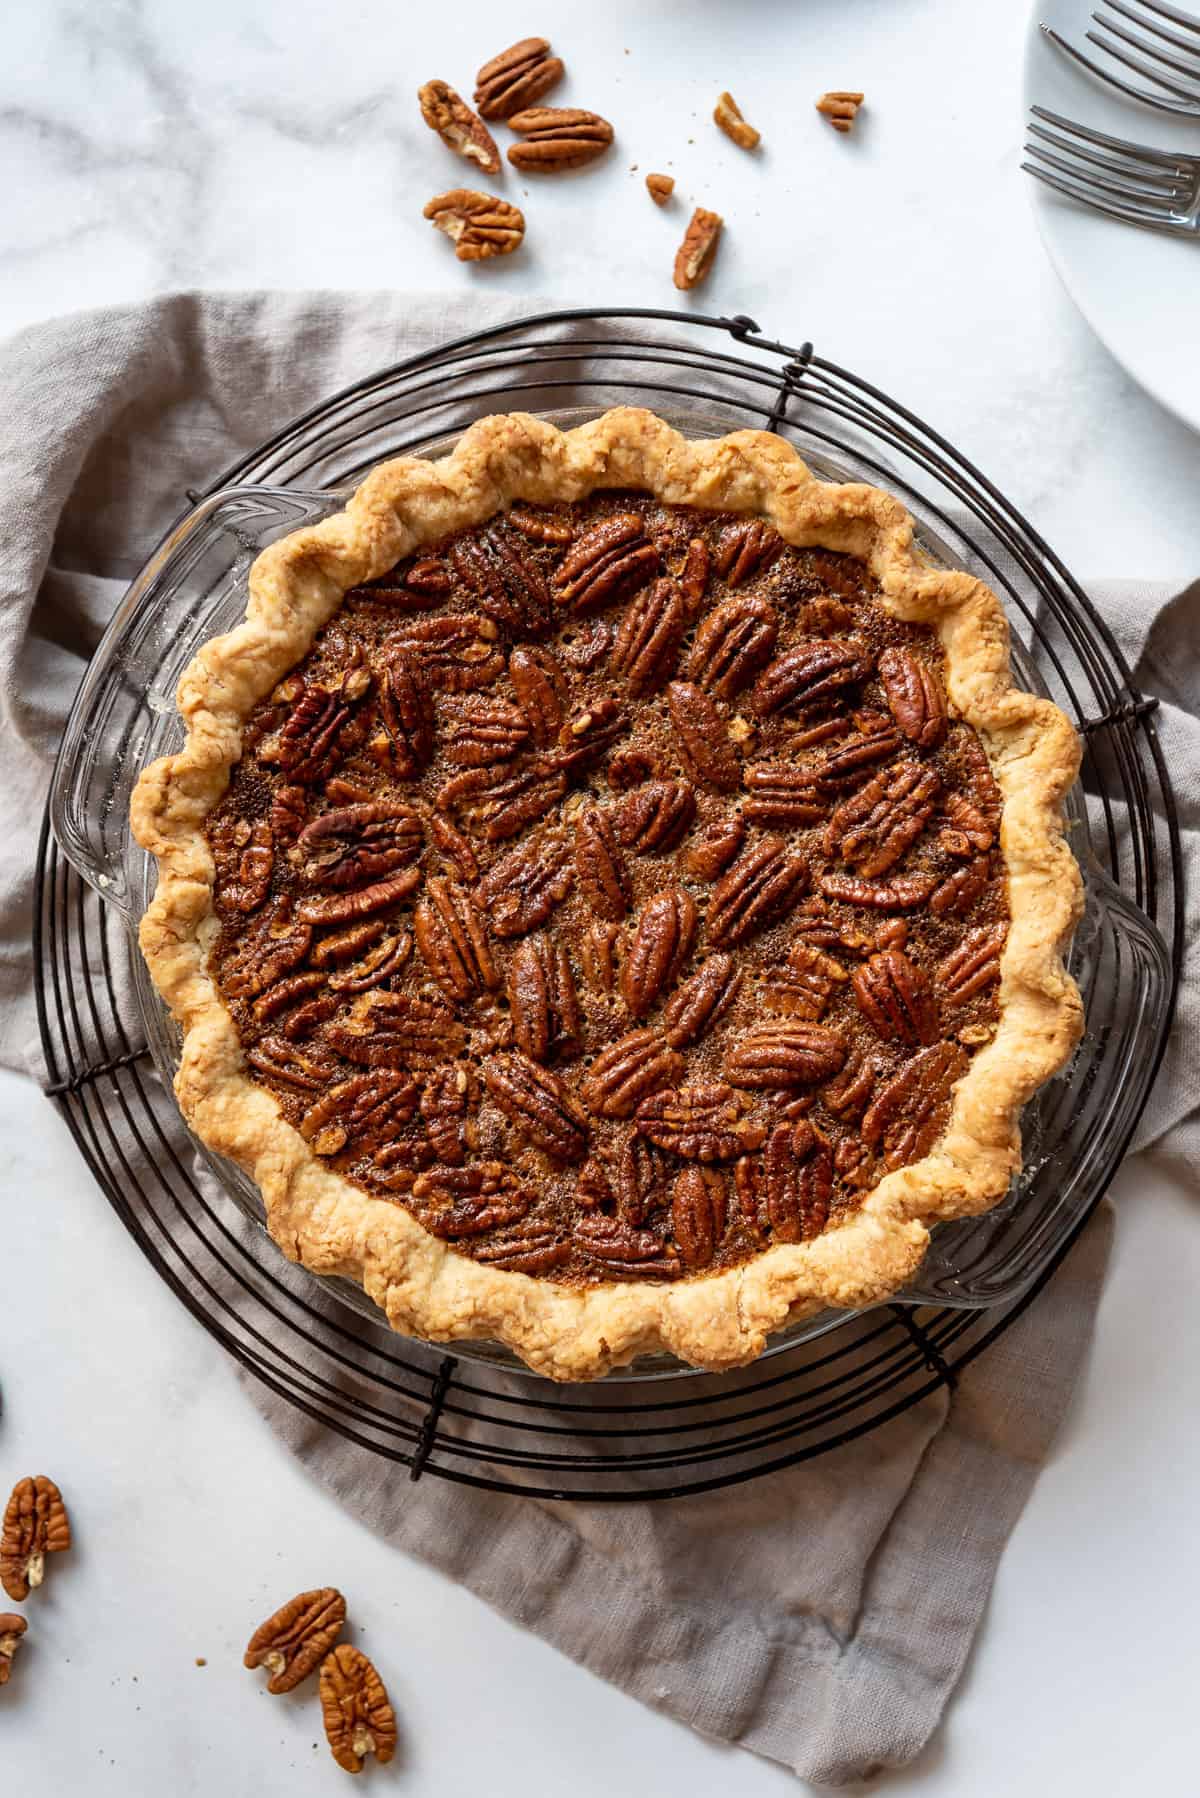 a homemade pecan pie made with whole pecans, corn syrup filling, and butter crust.